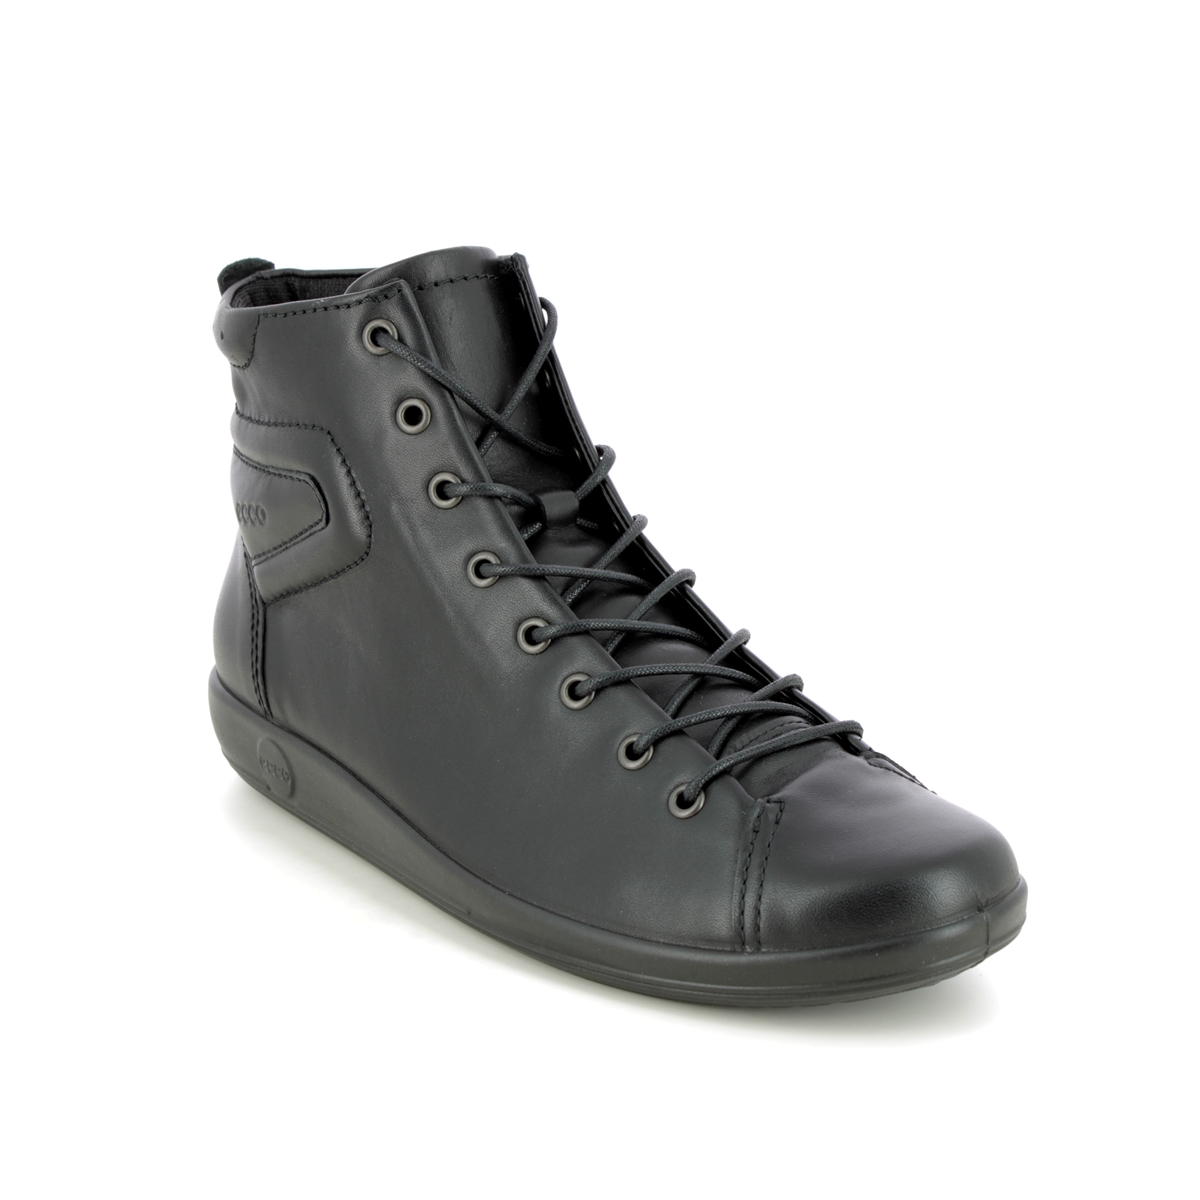 ECCO Soft 2.0 Boot Black leather Womens Lace Up Boots 206523-56723 in a Plain Leather in Size 39